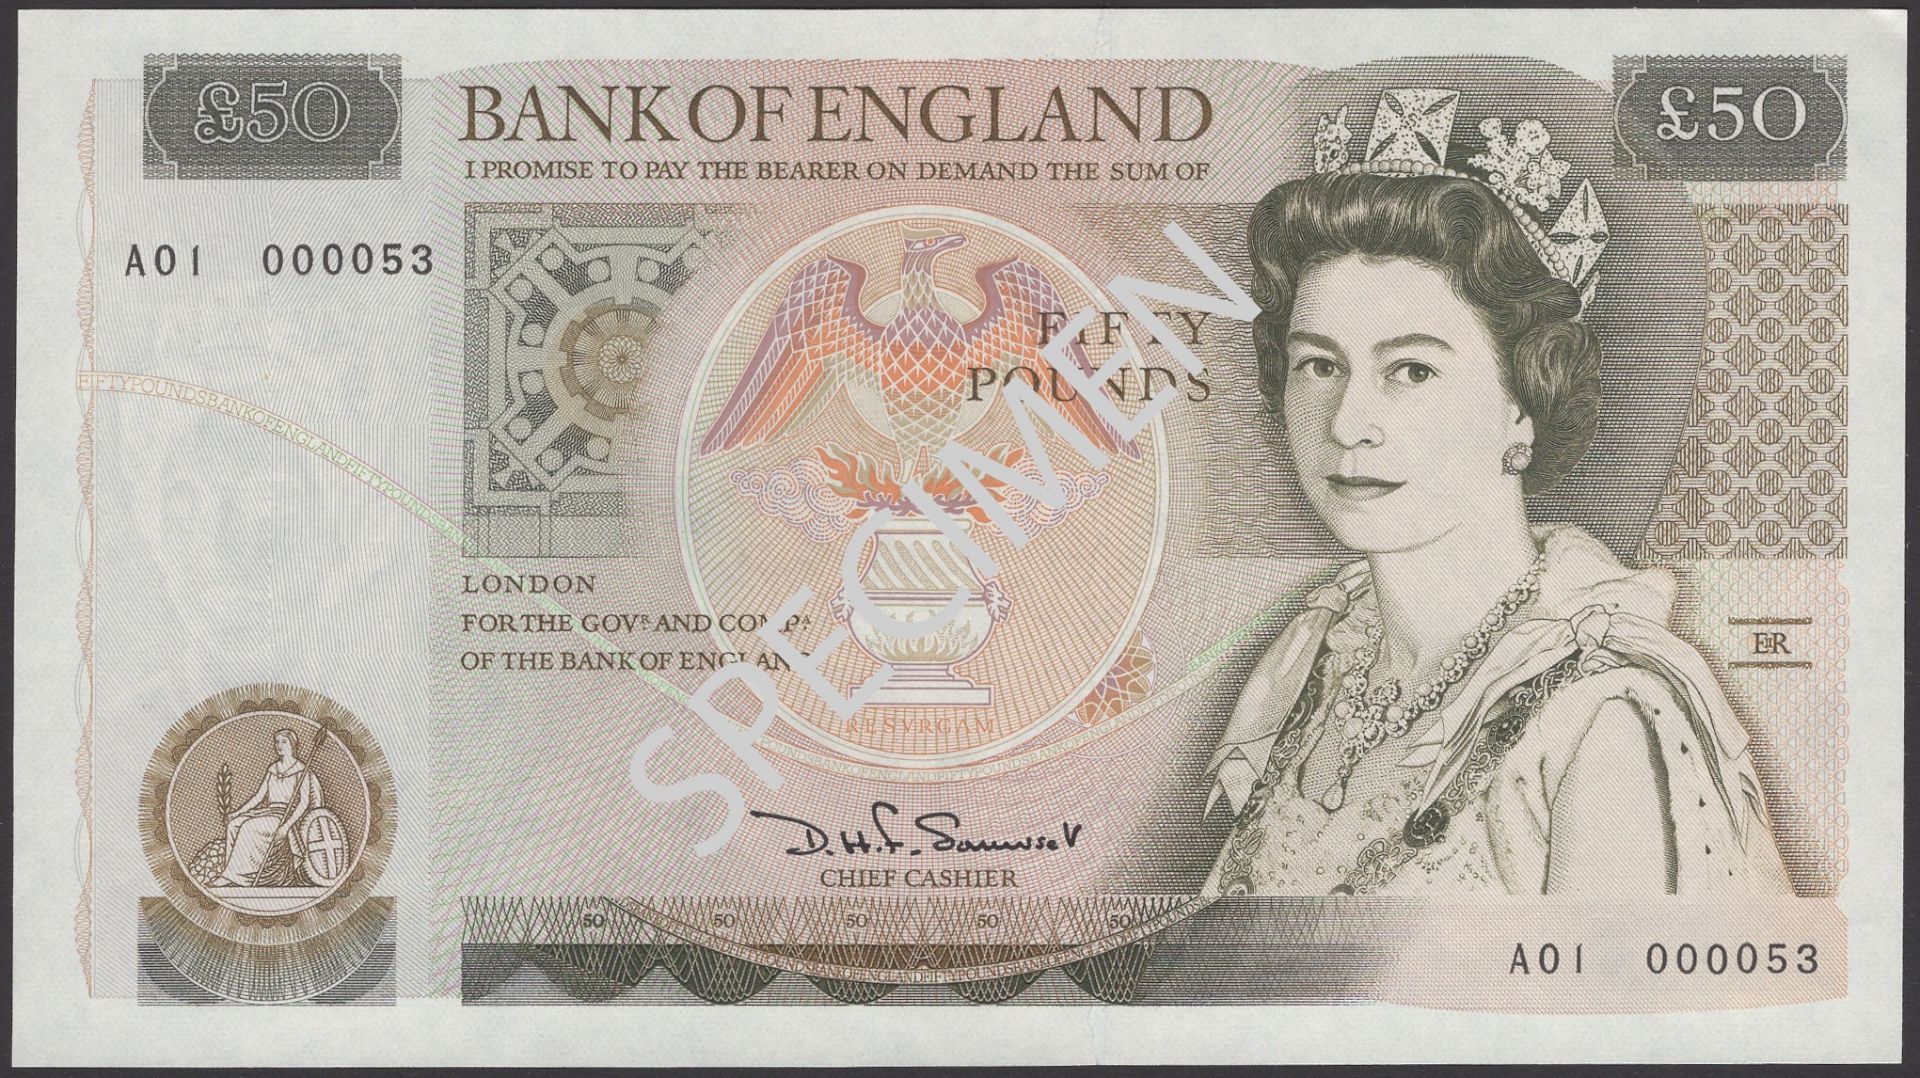 Bank of England, David H. F. Somerset, Â£50, 20 March 1981, serial number A01 000053, fresh a...